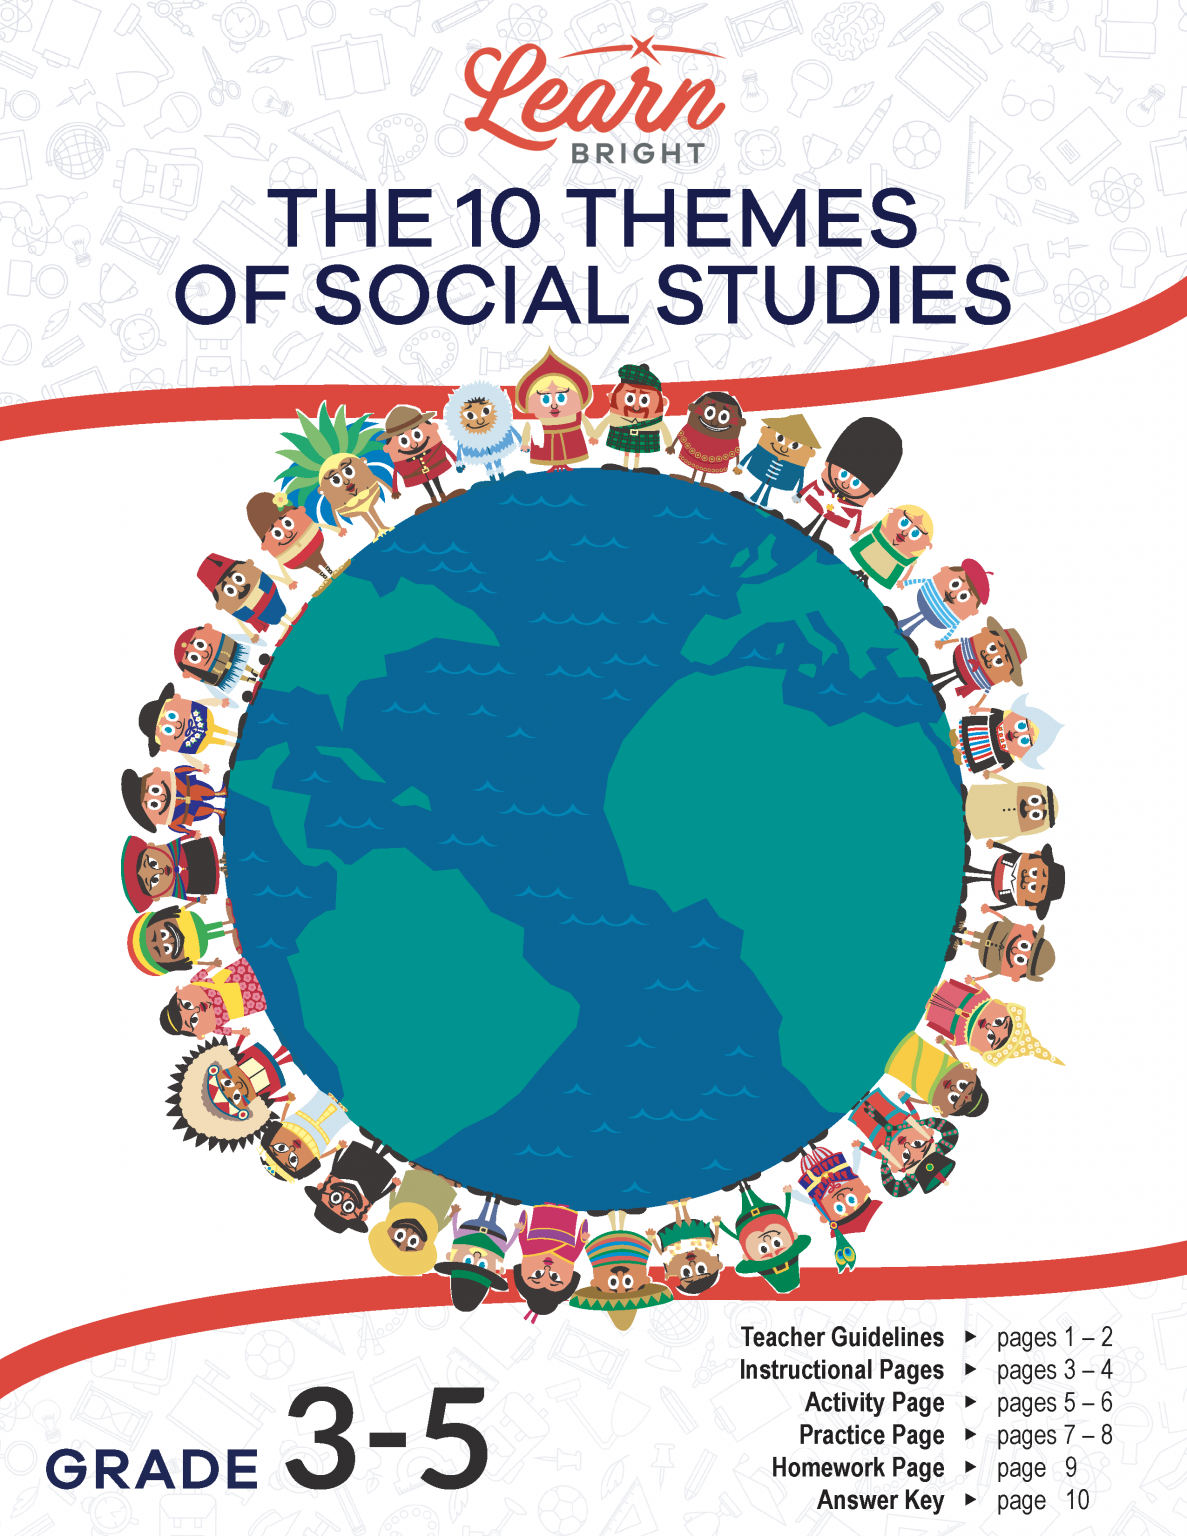 10-themes-of-social-studies-free-pdf-download-learn-bright